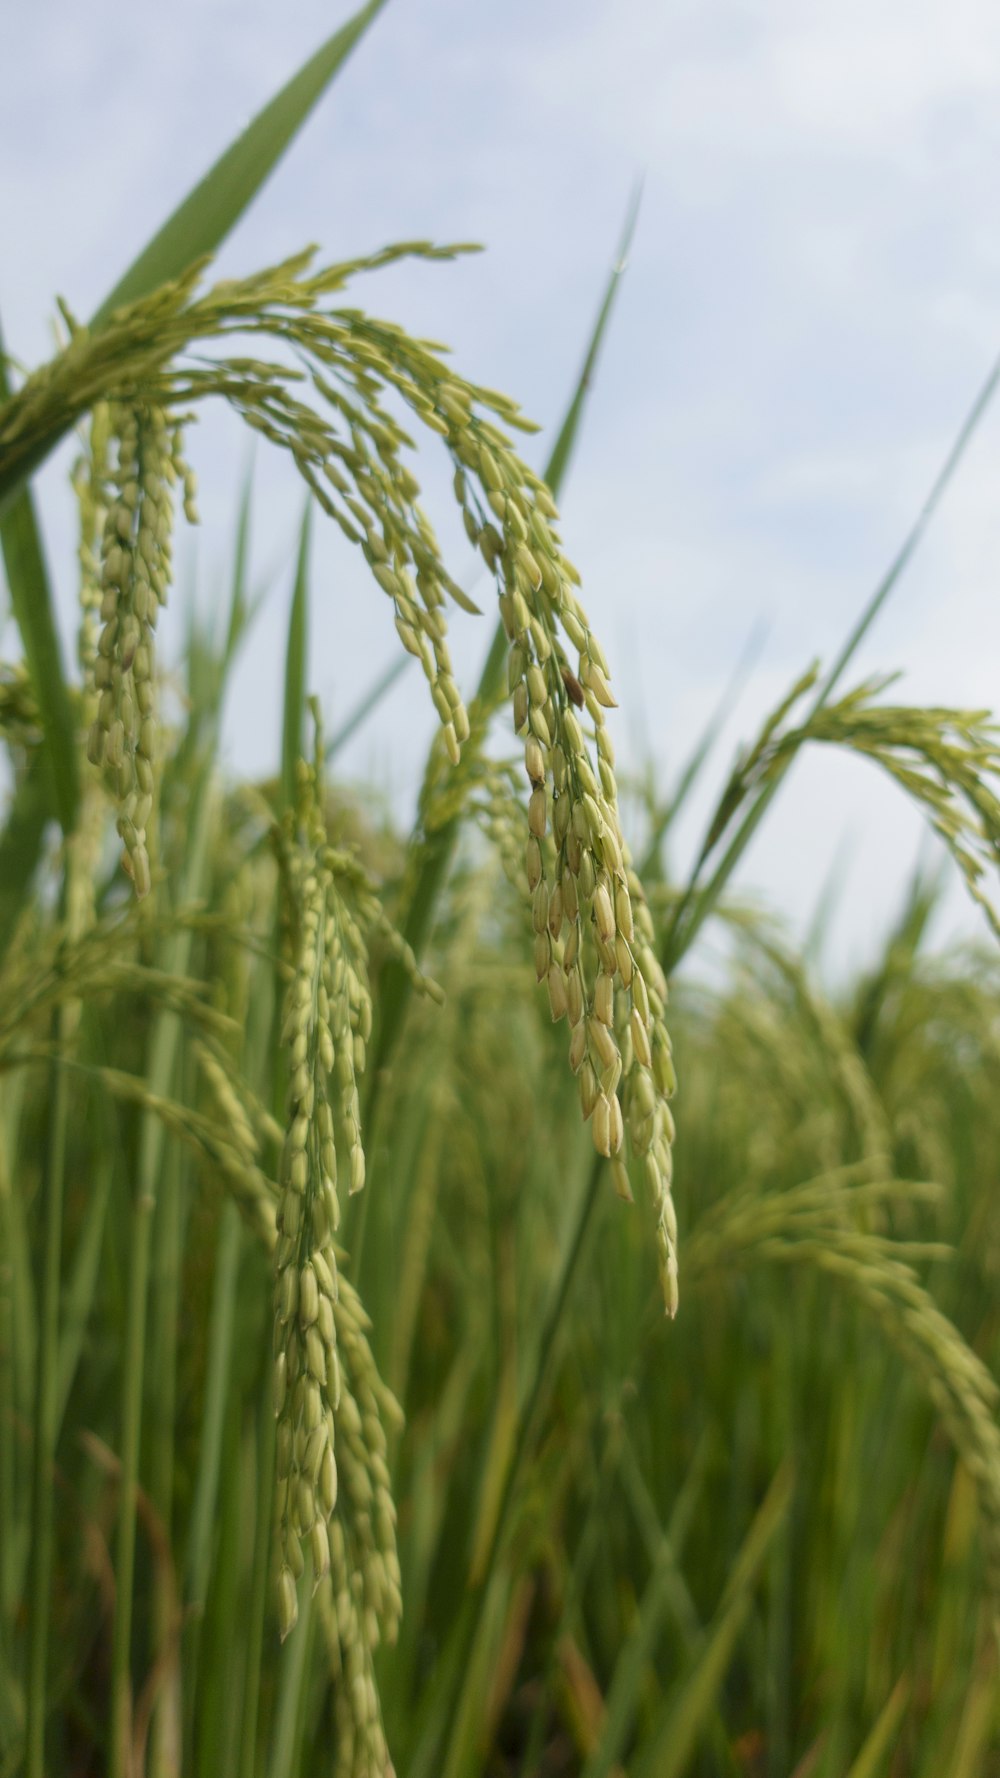 close-up of a wheat field